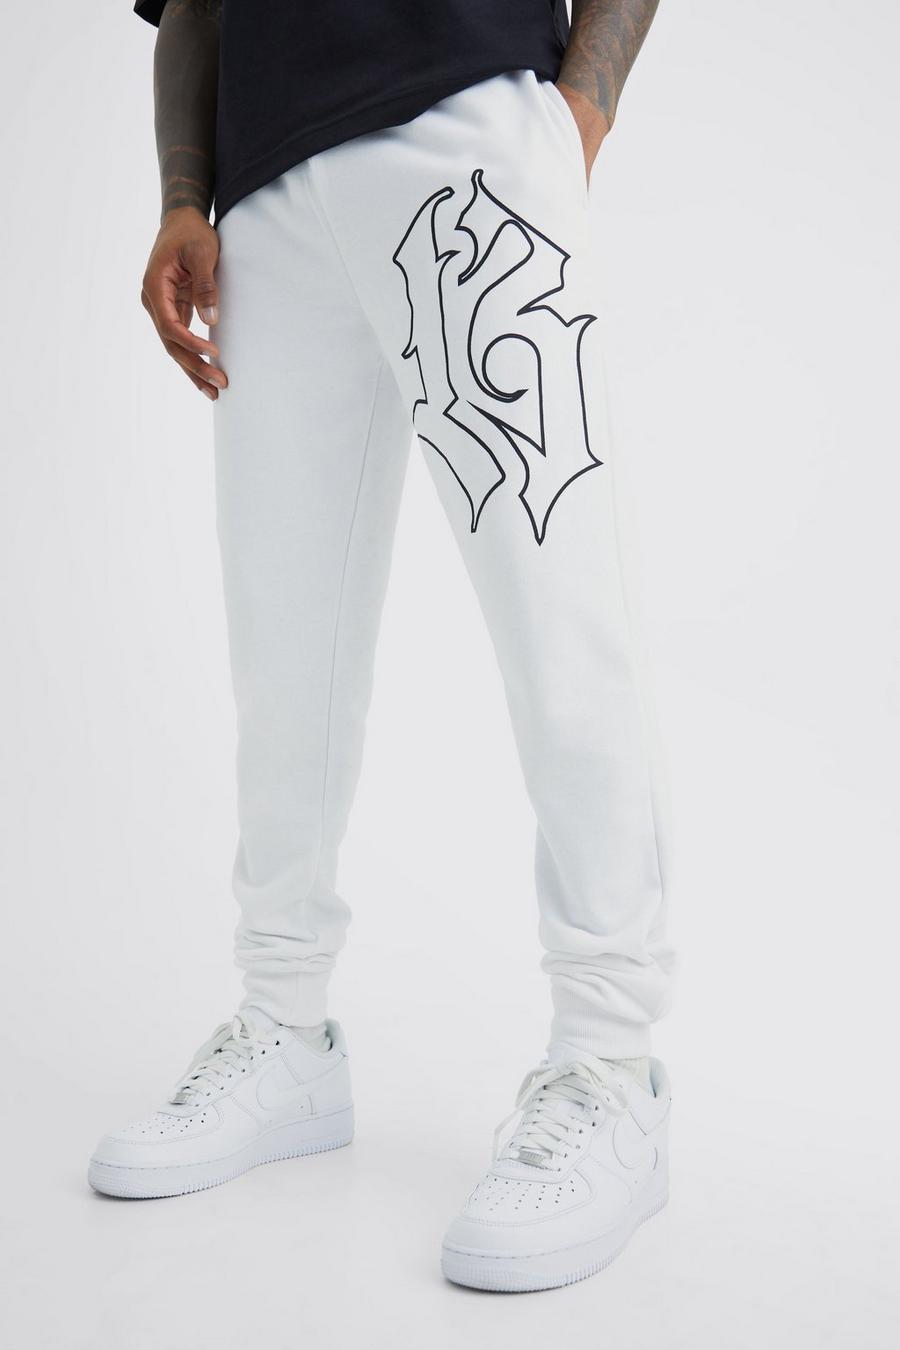 White ArrDee Skinny Fit Gothic 13 Print Joggers